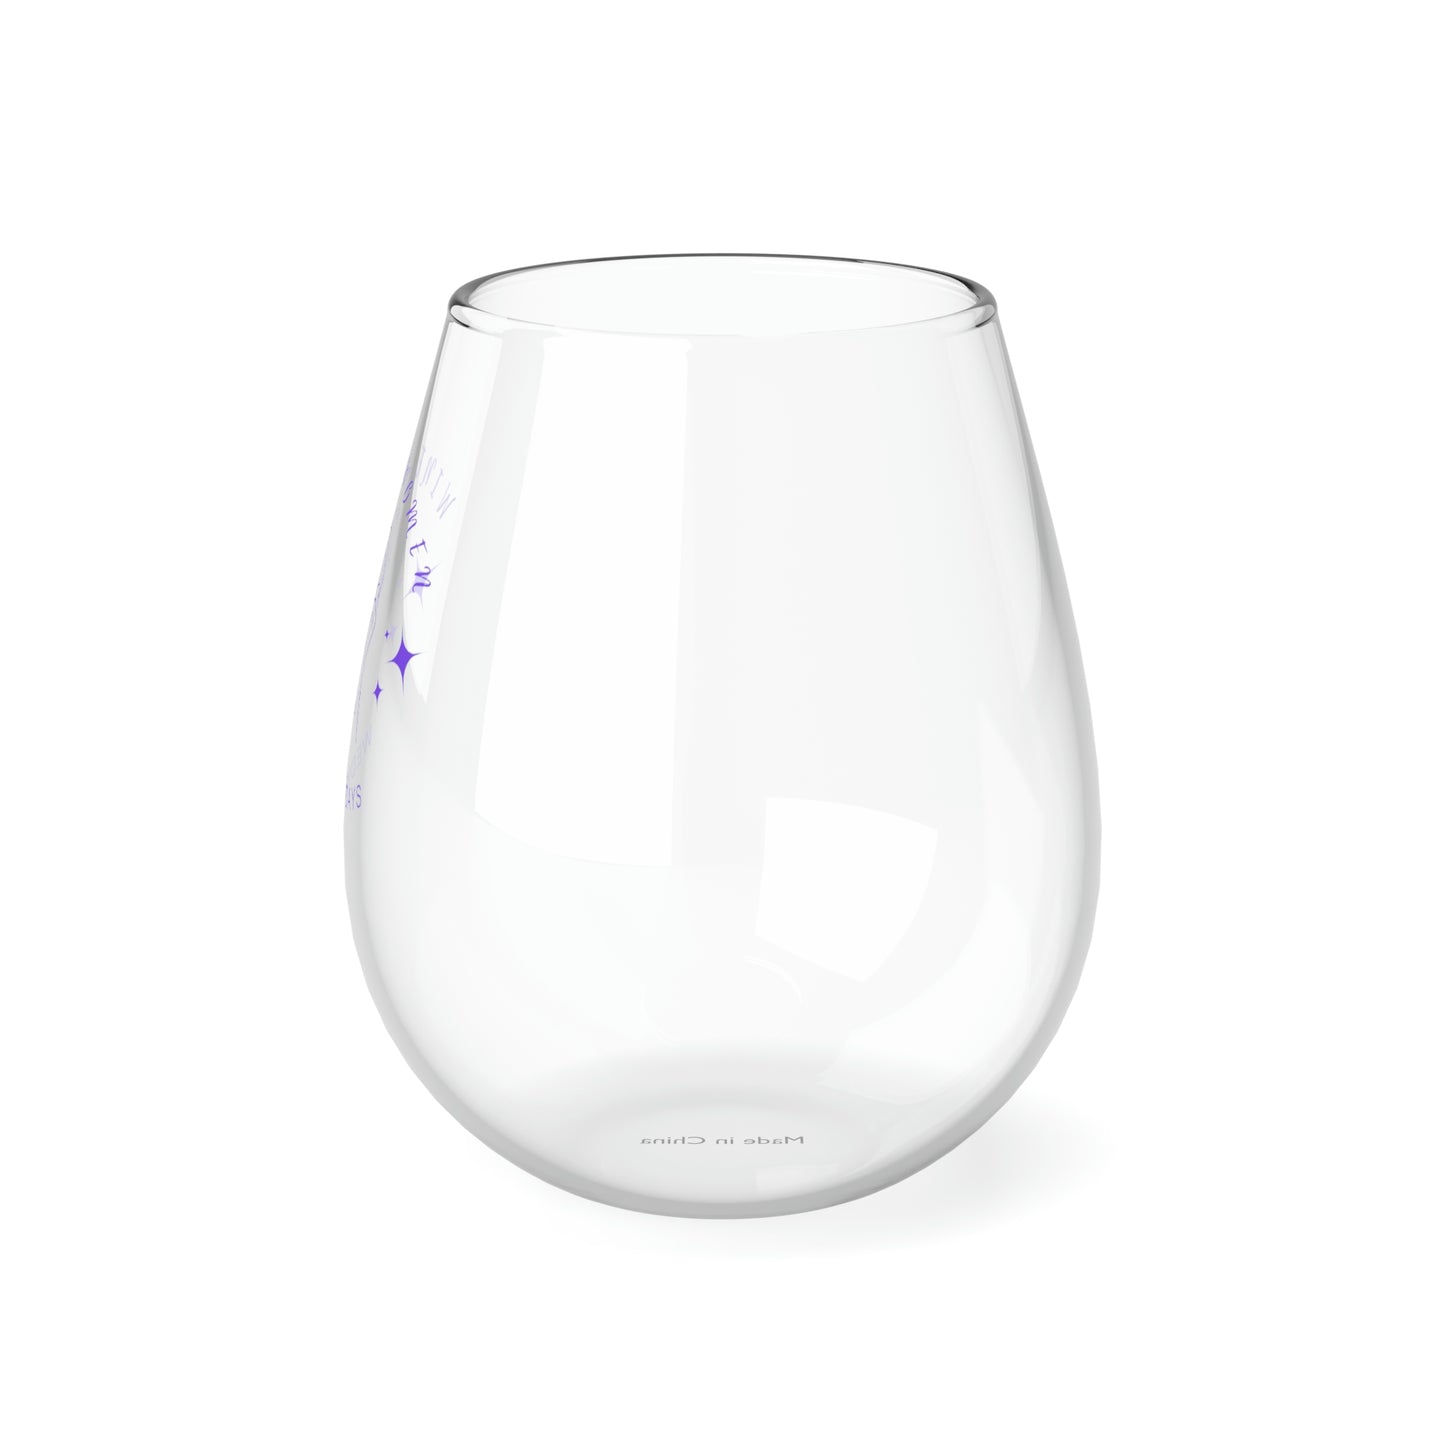 SPECIAL REQUEST ORDER: (script font) Wine and Women Wednesdays - Stemless Wine Glass, 11.75oz